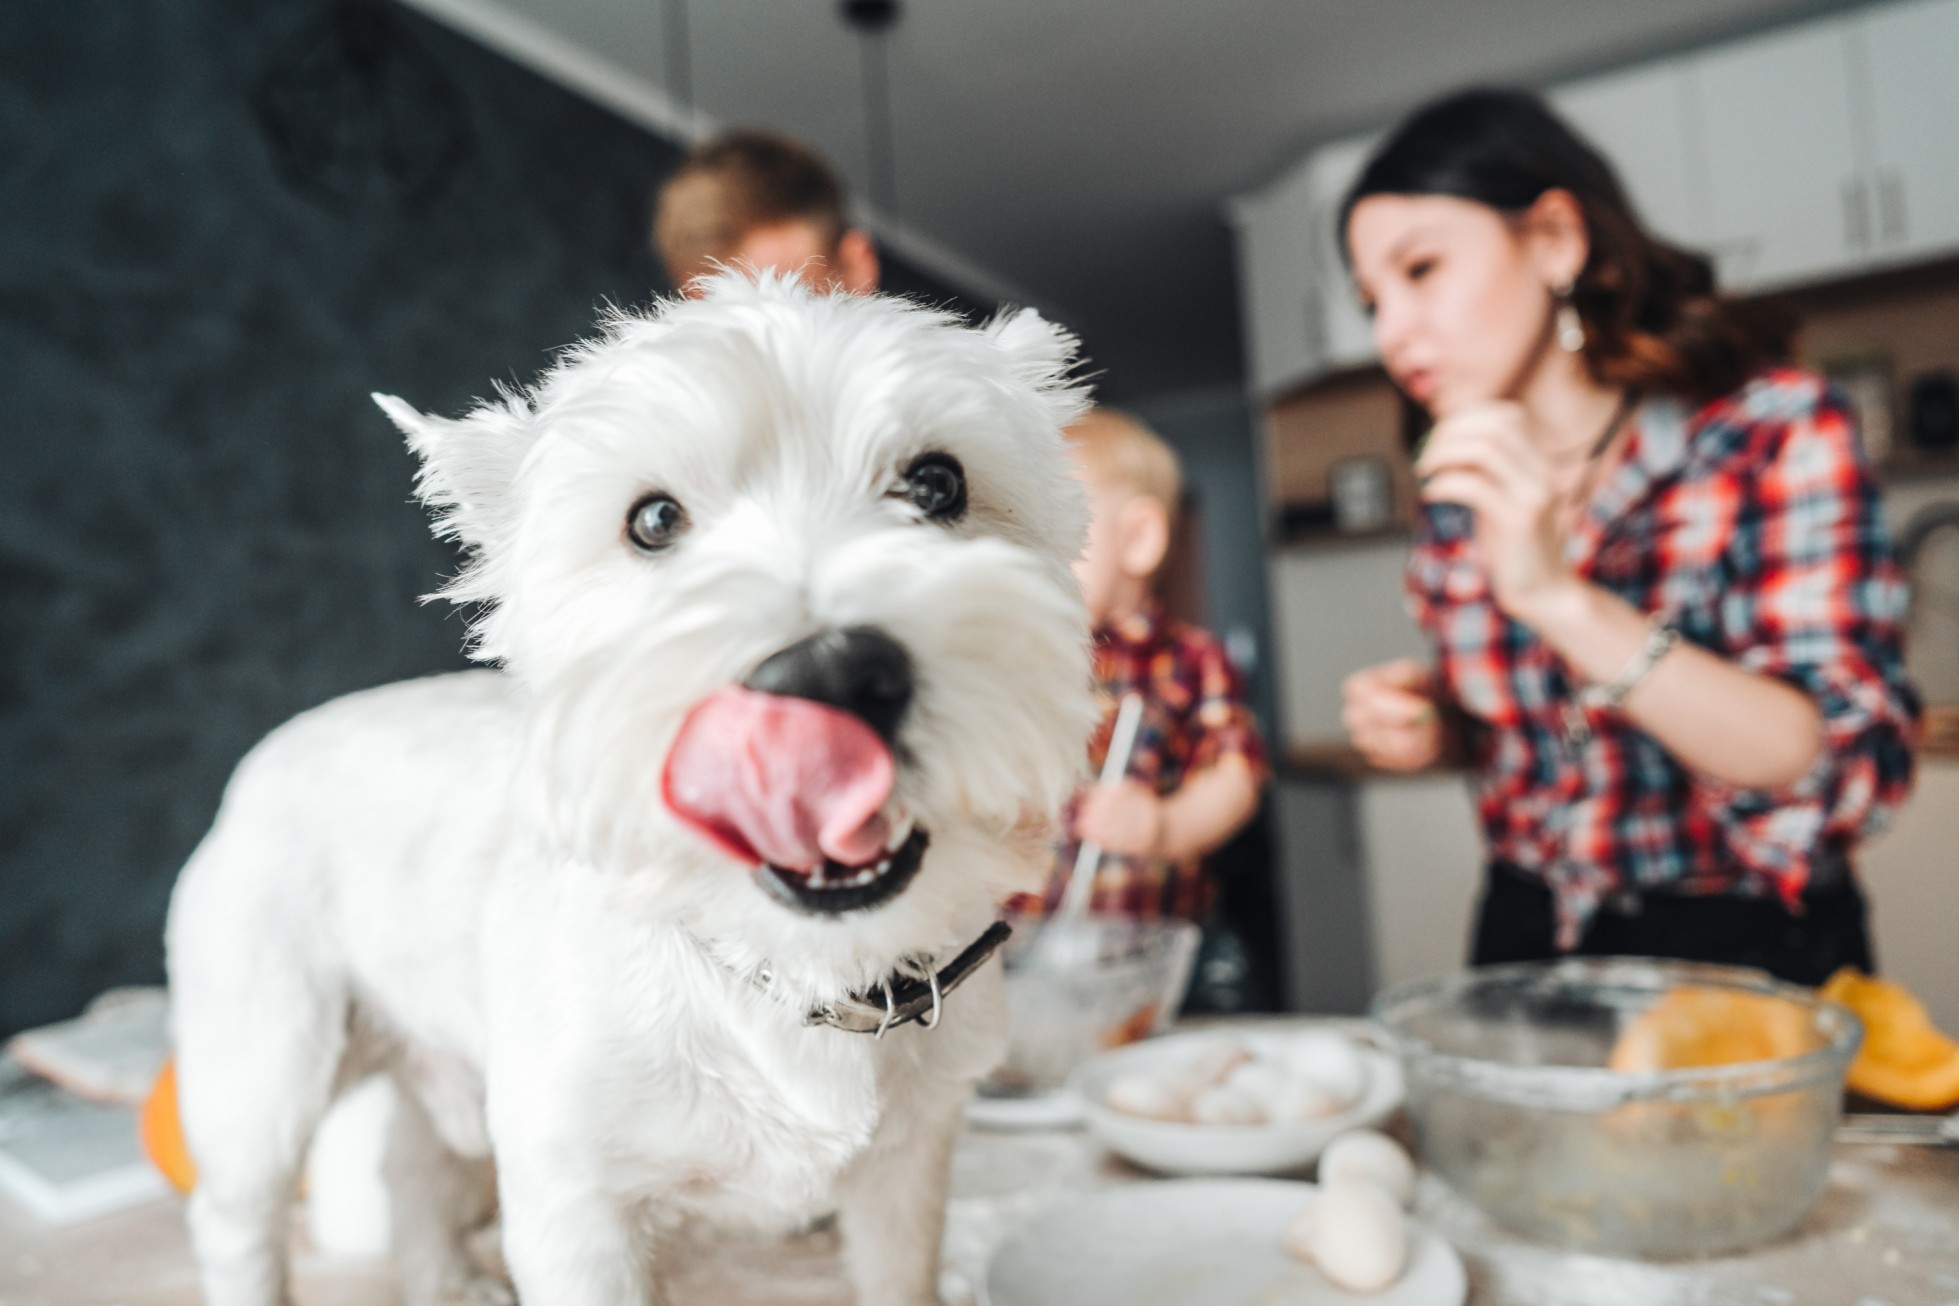 A small white dog in a kitchen